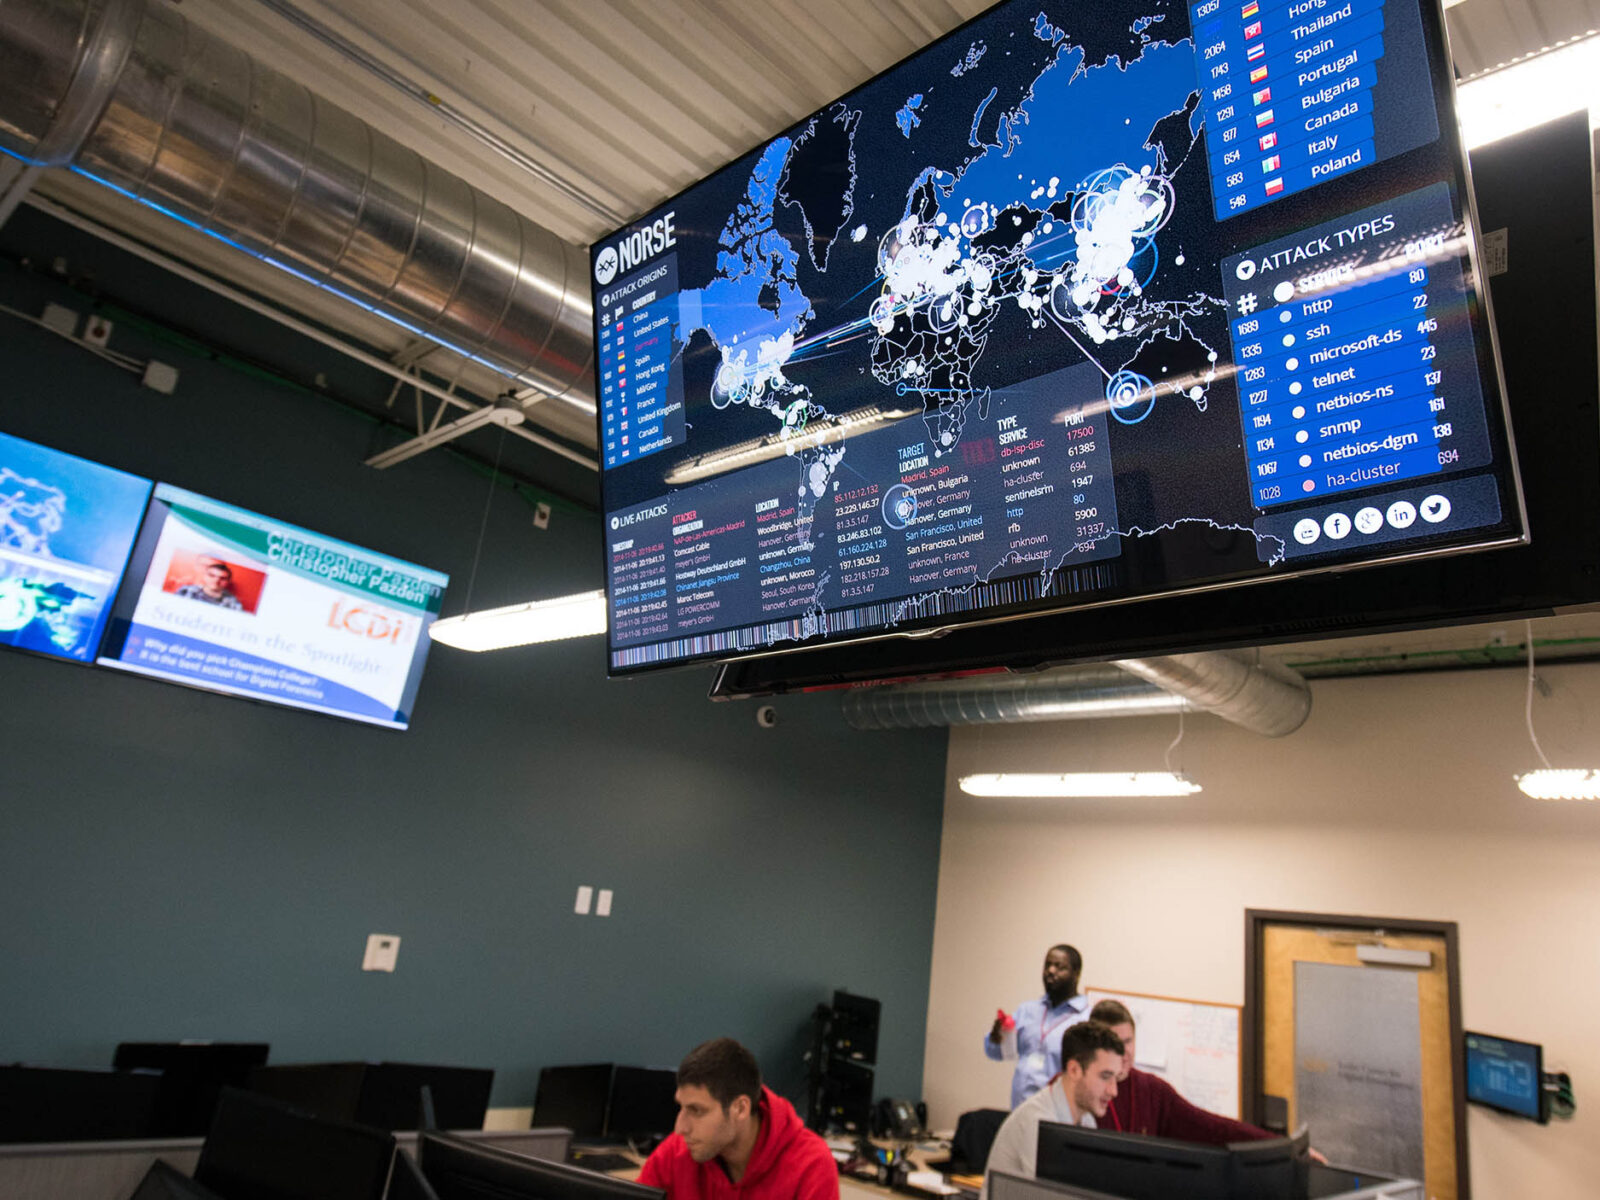 a large monitor in a professional environment featuring lots of visual data